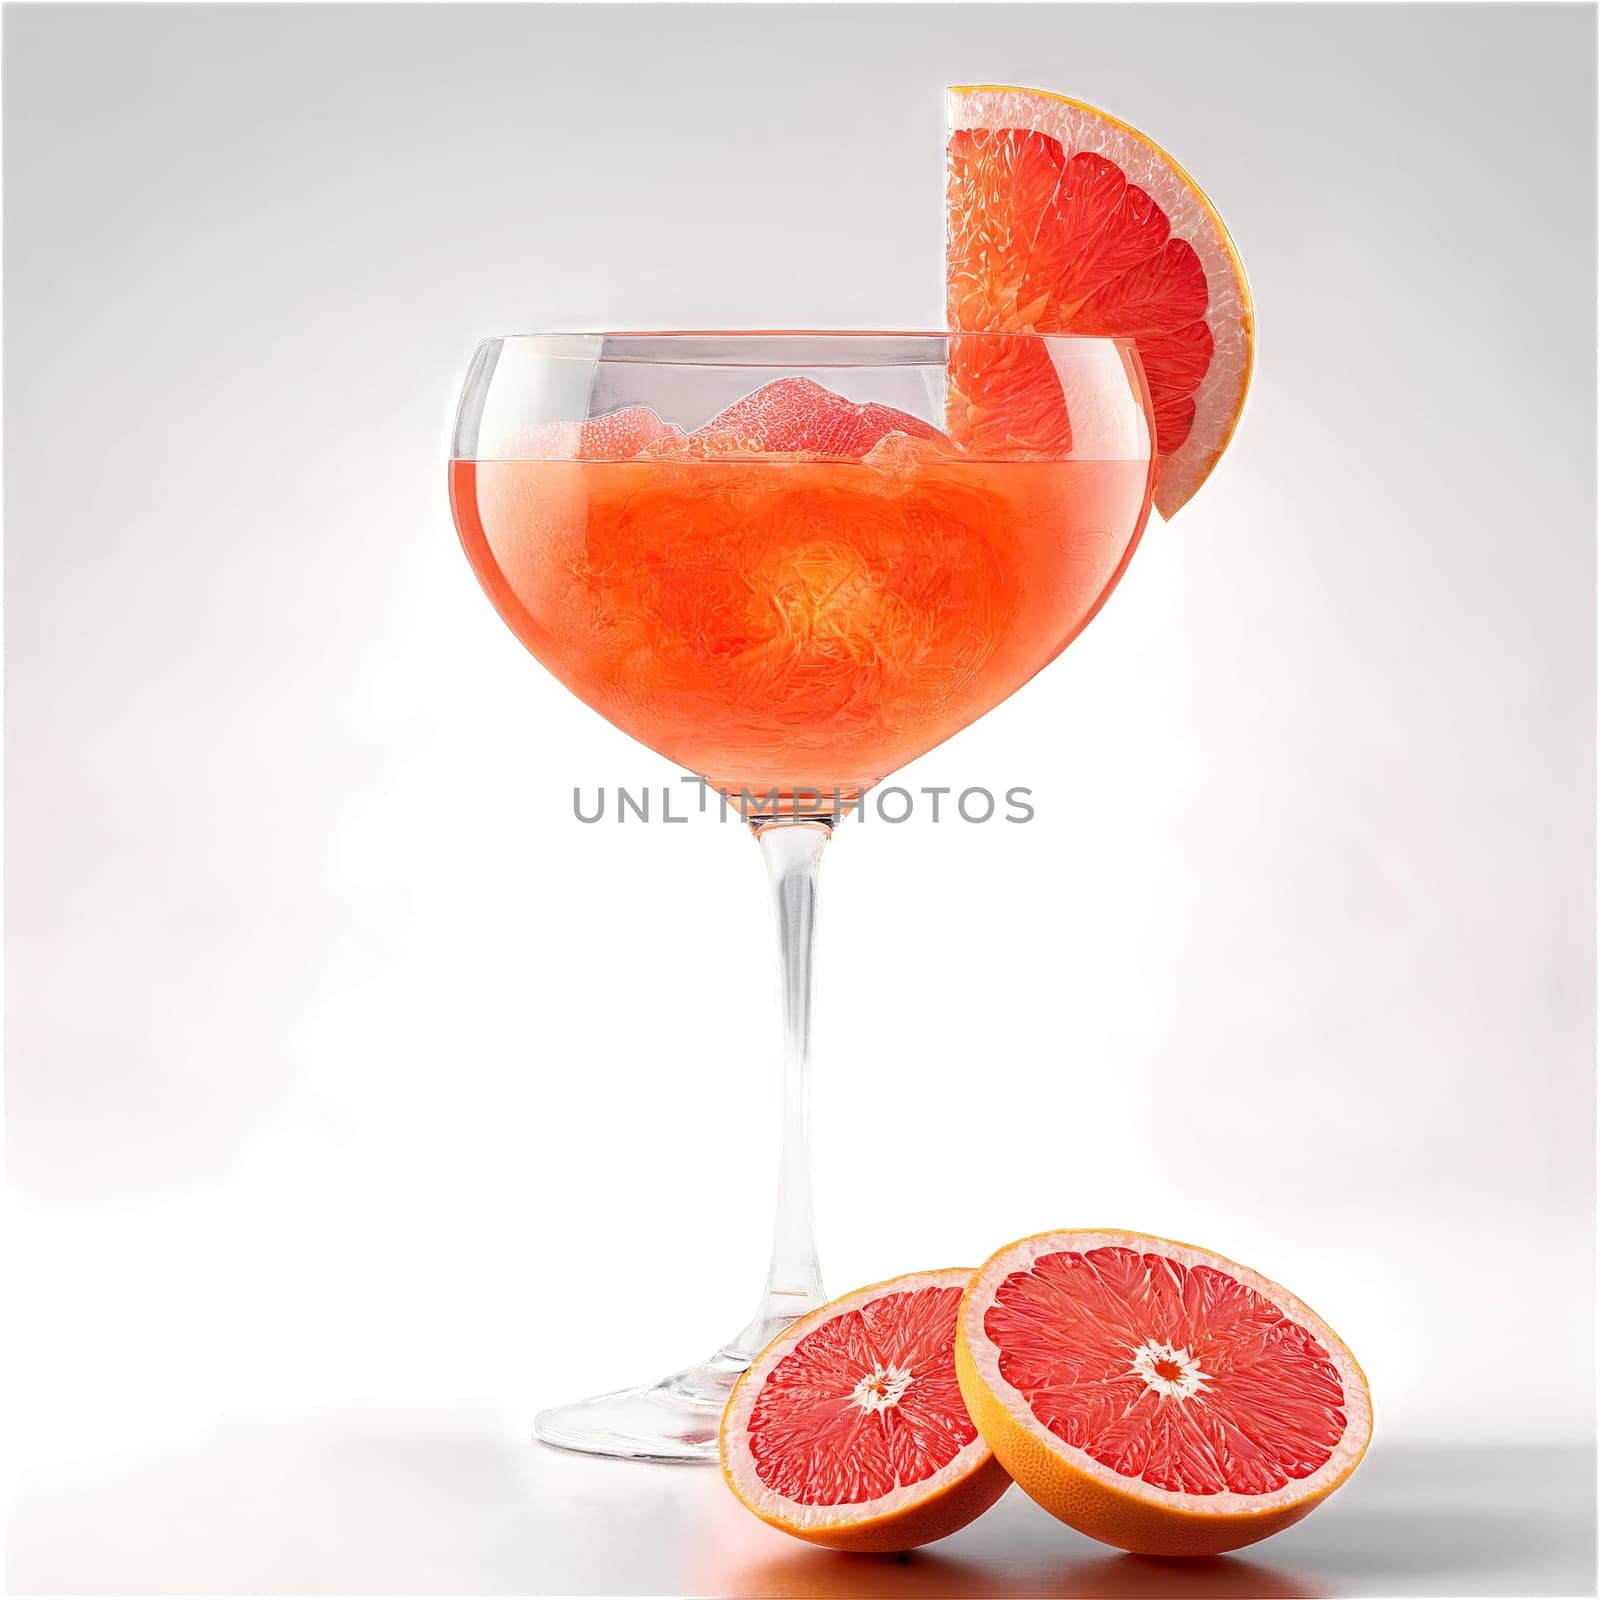 Aperol frose frozen and bittersweet with grapefruit segments and rose wine dancing in an Itali by panophotograph